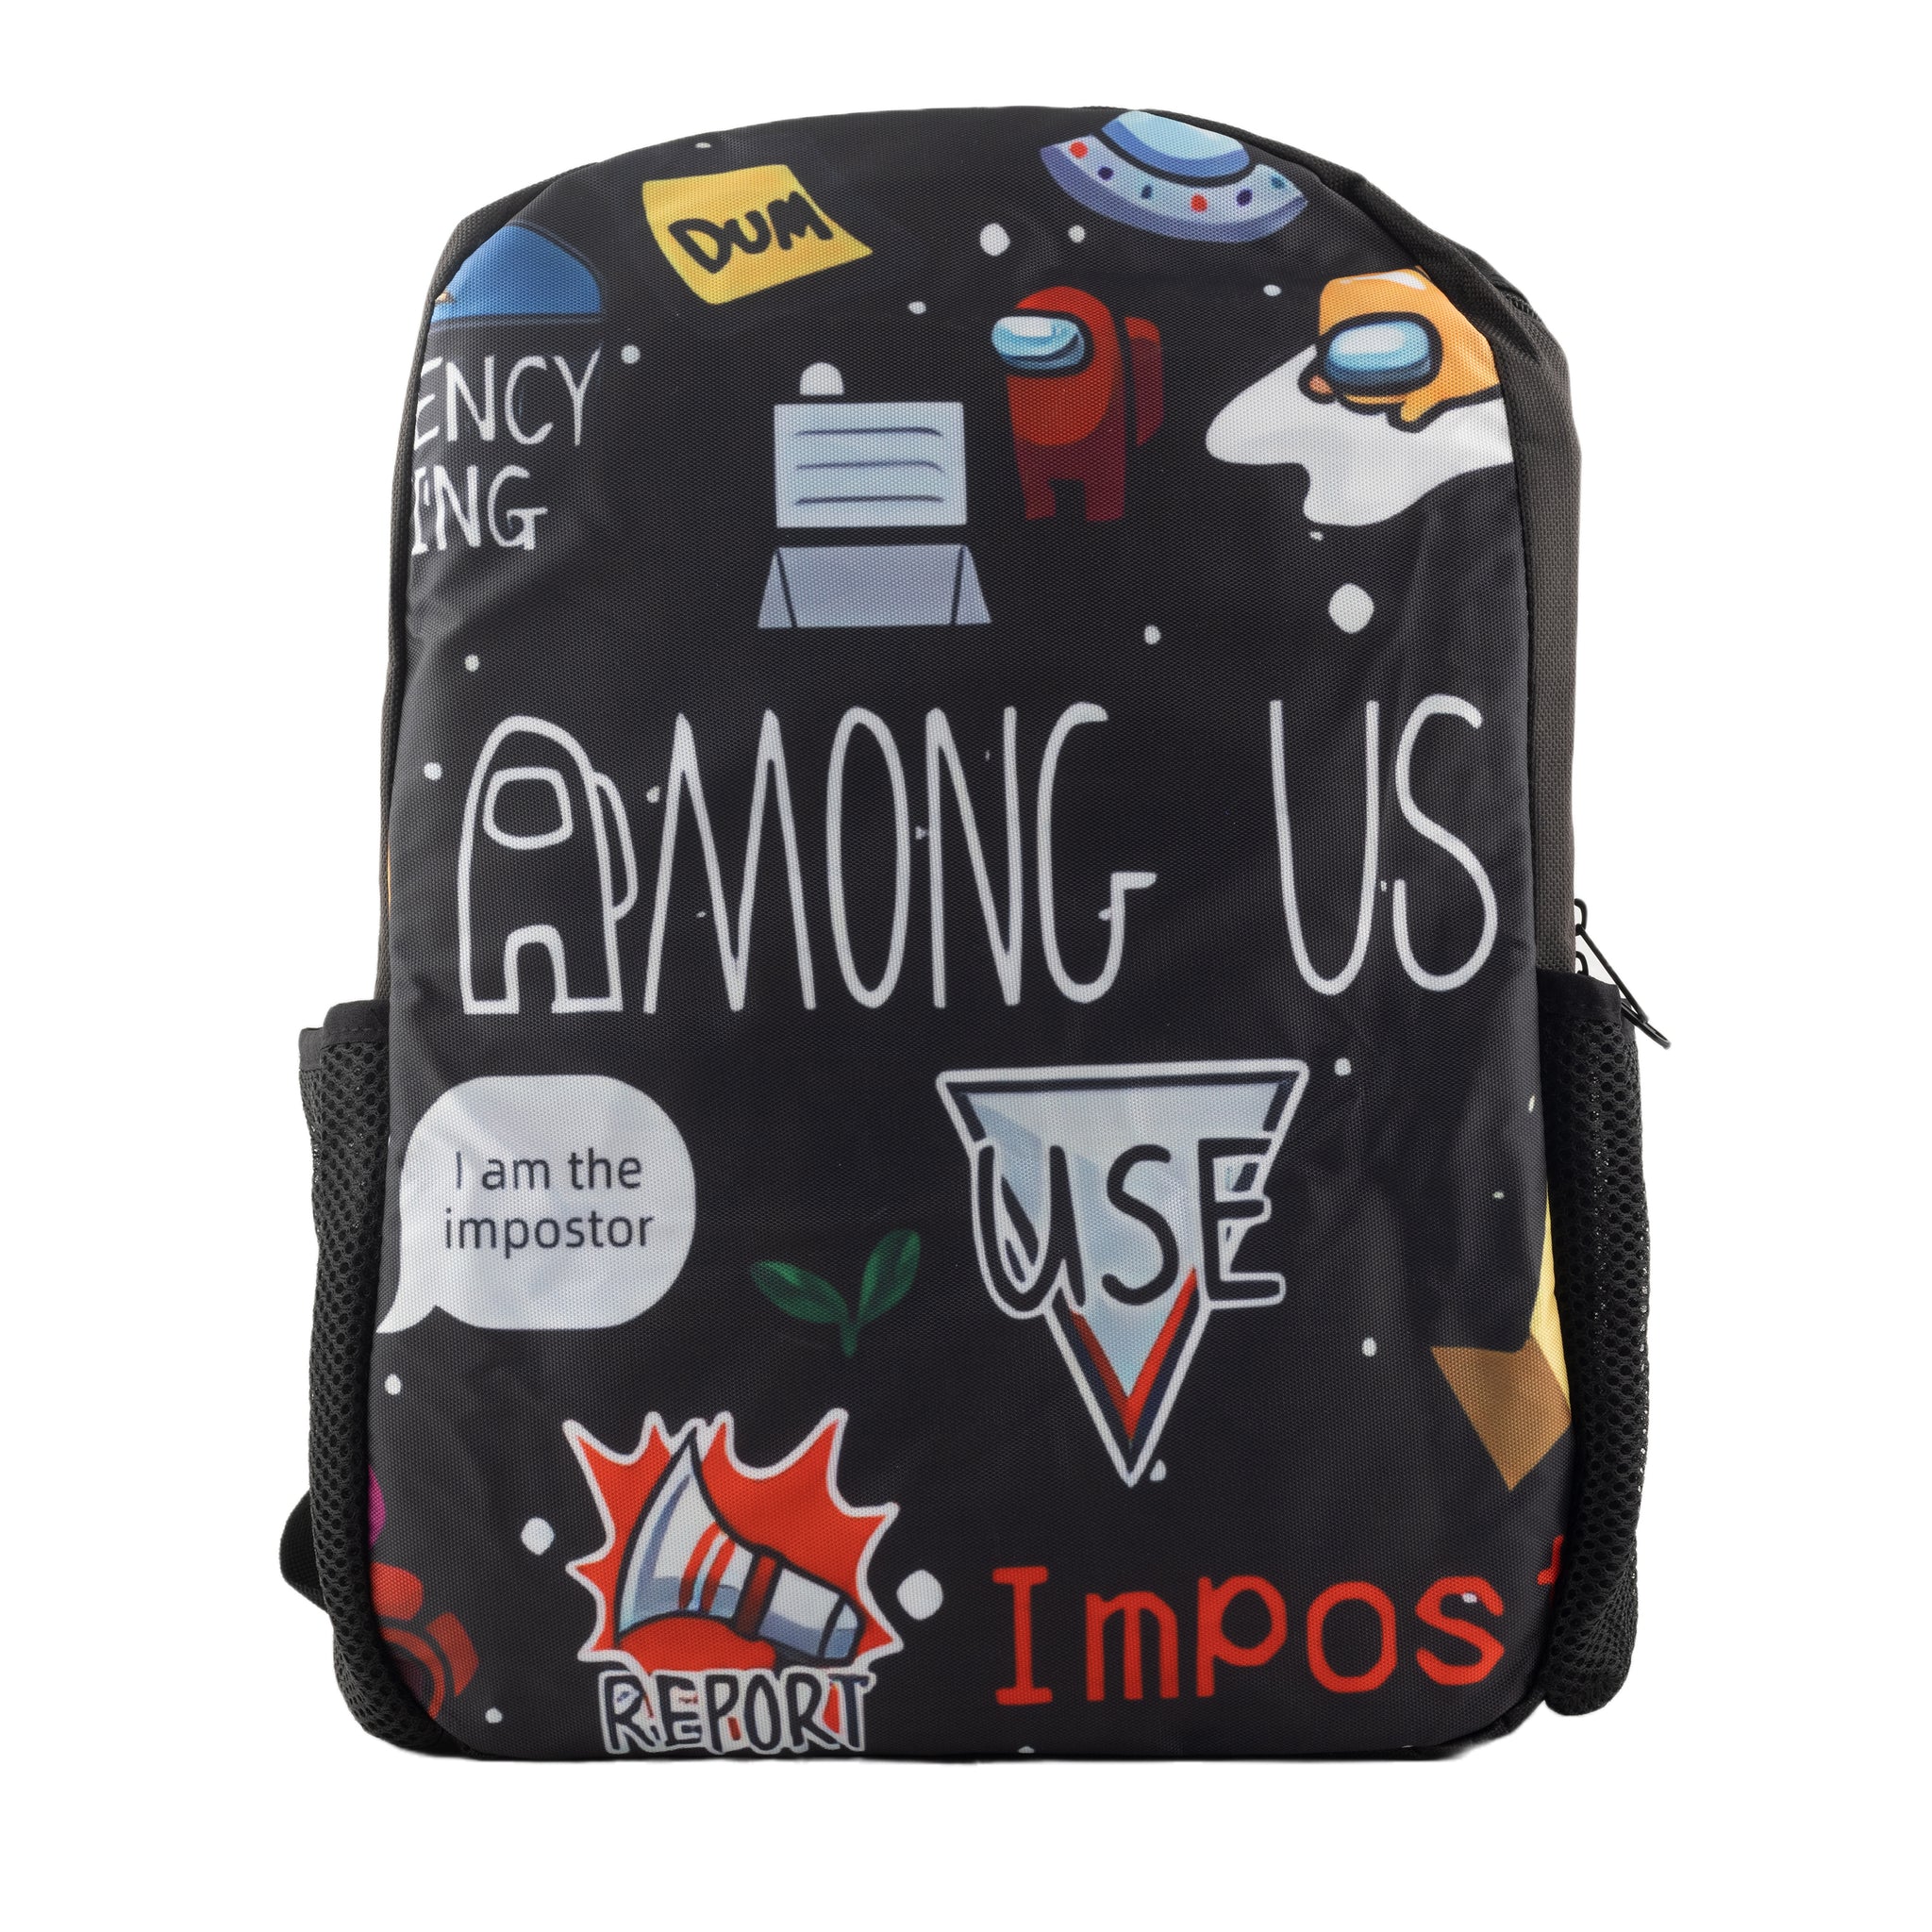 Kids Backpack with Sling Bag & Pouch - Among Us